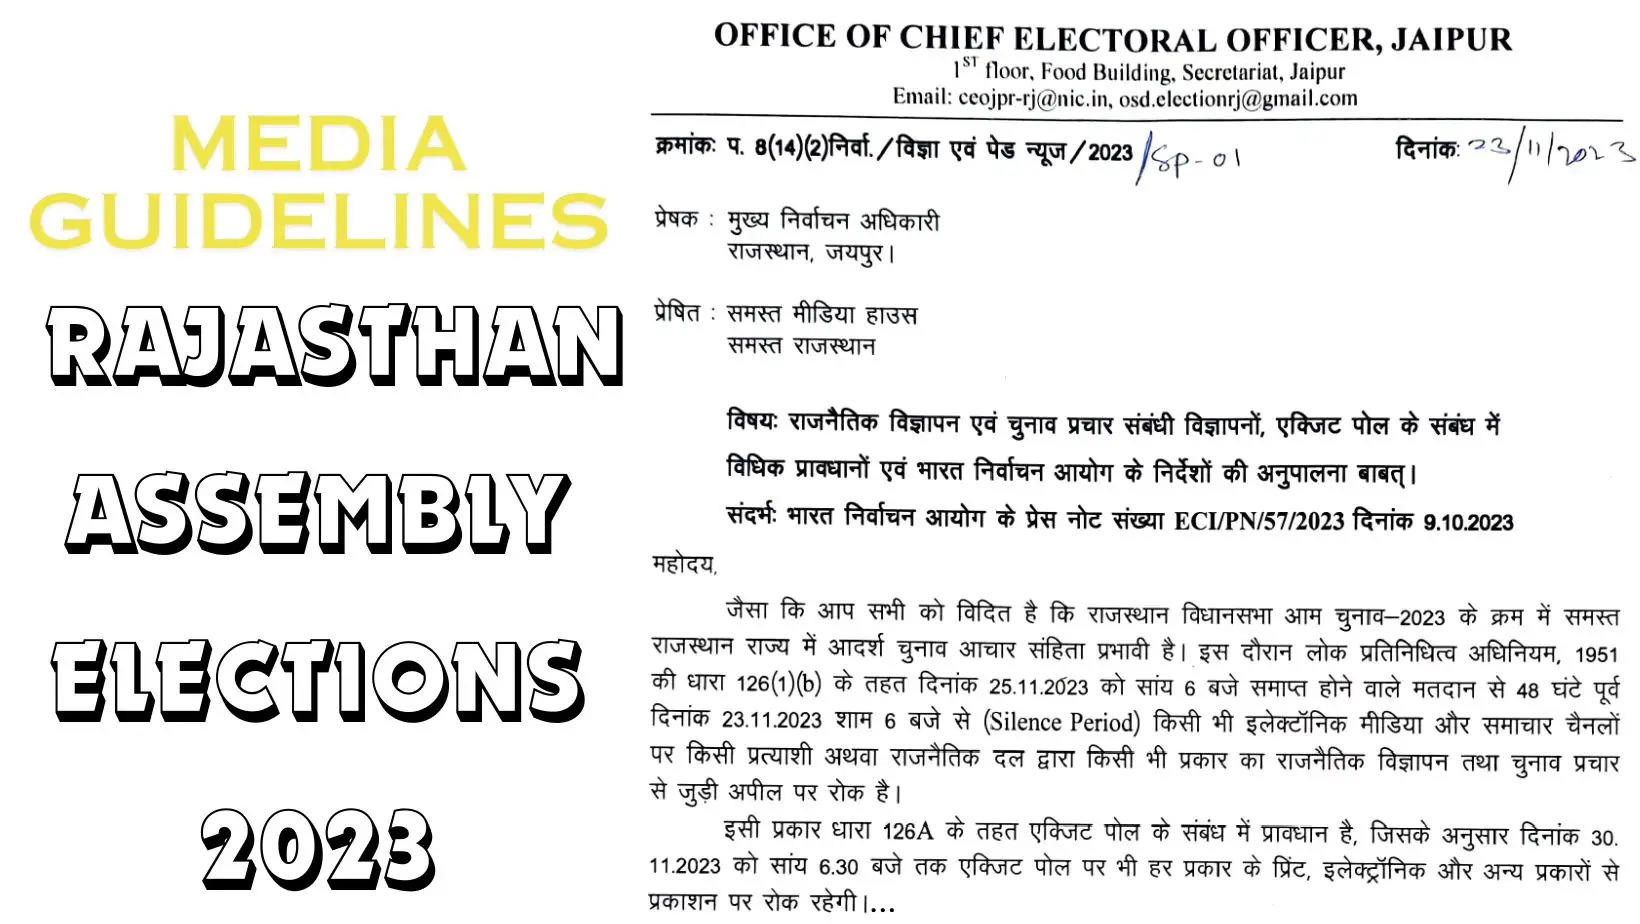 Media guidelines during rajasthan assembly elections 2023